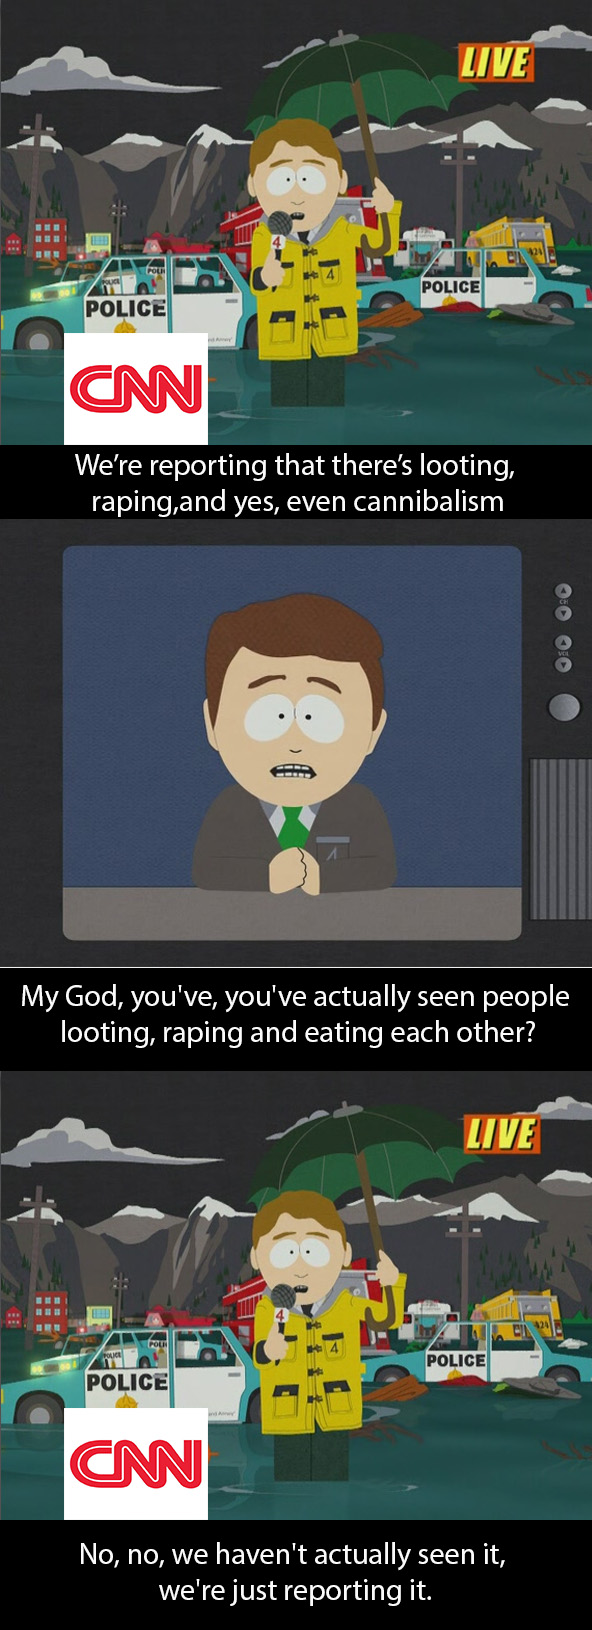 south park news - Live Police Police Cnn We're reporting that there's looting, raping,and yes, even cannibalism My God, you've, you've actually seen people looting, raping and eating each other? Live A Police Police Cnn No, no, we haven't actually seen it